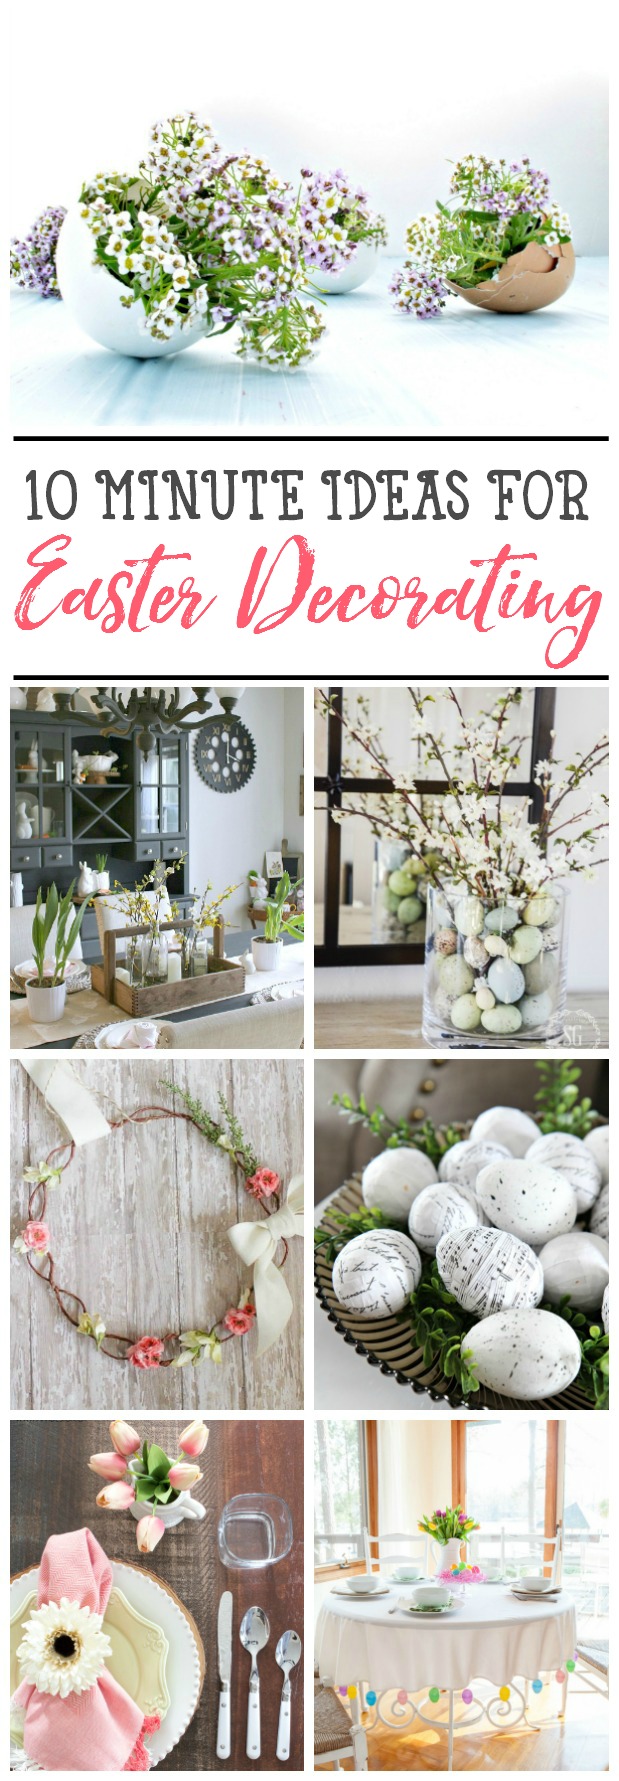 Beautiful Easter decor ideas that can be done in no time!